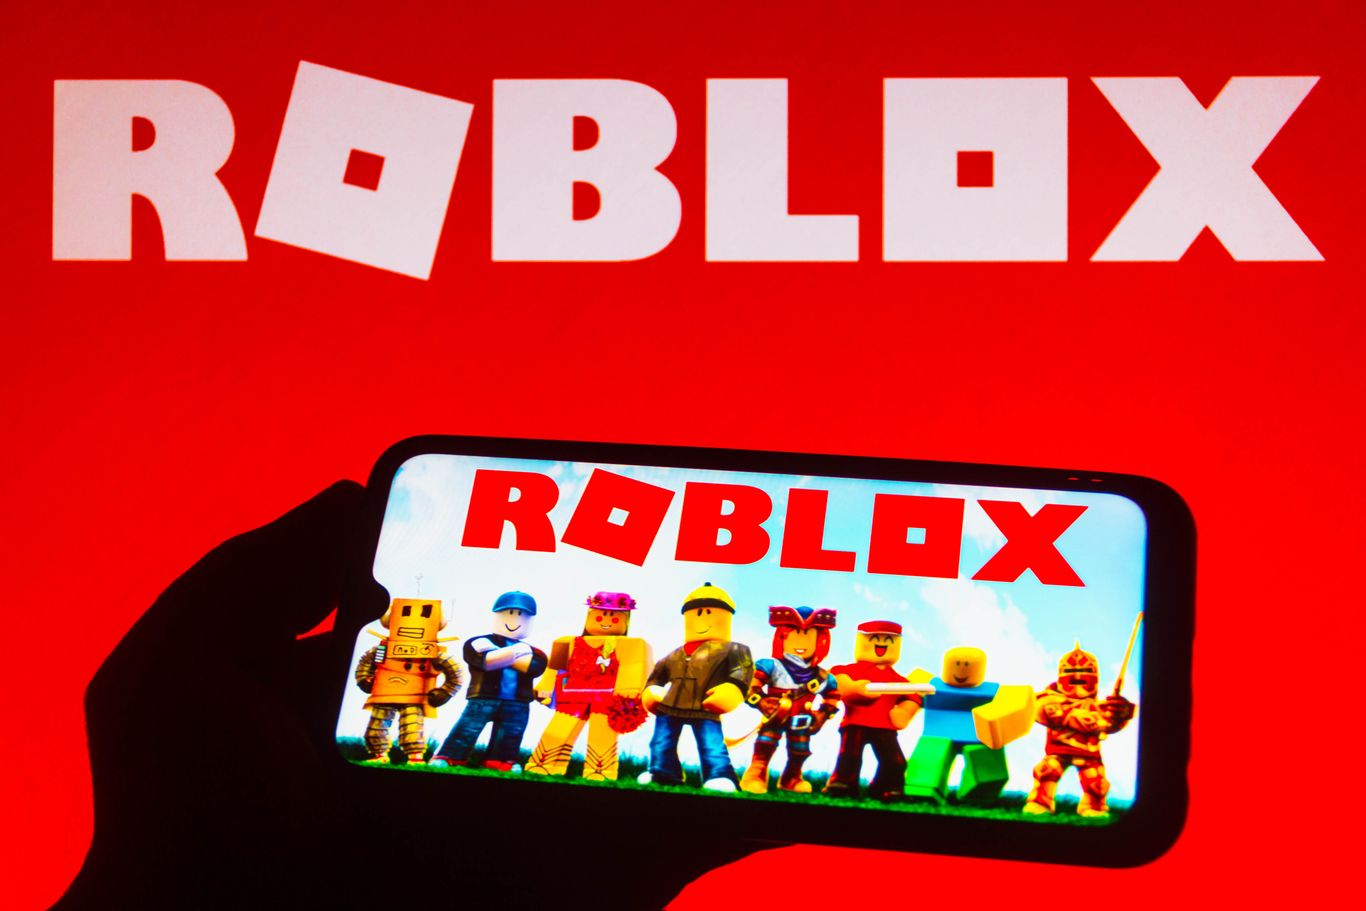 Roblox back online after three-day outage - says hackers not to blame, Science & Tech News